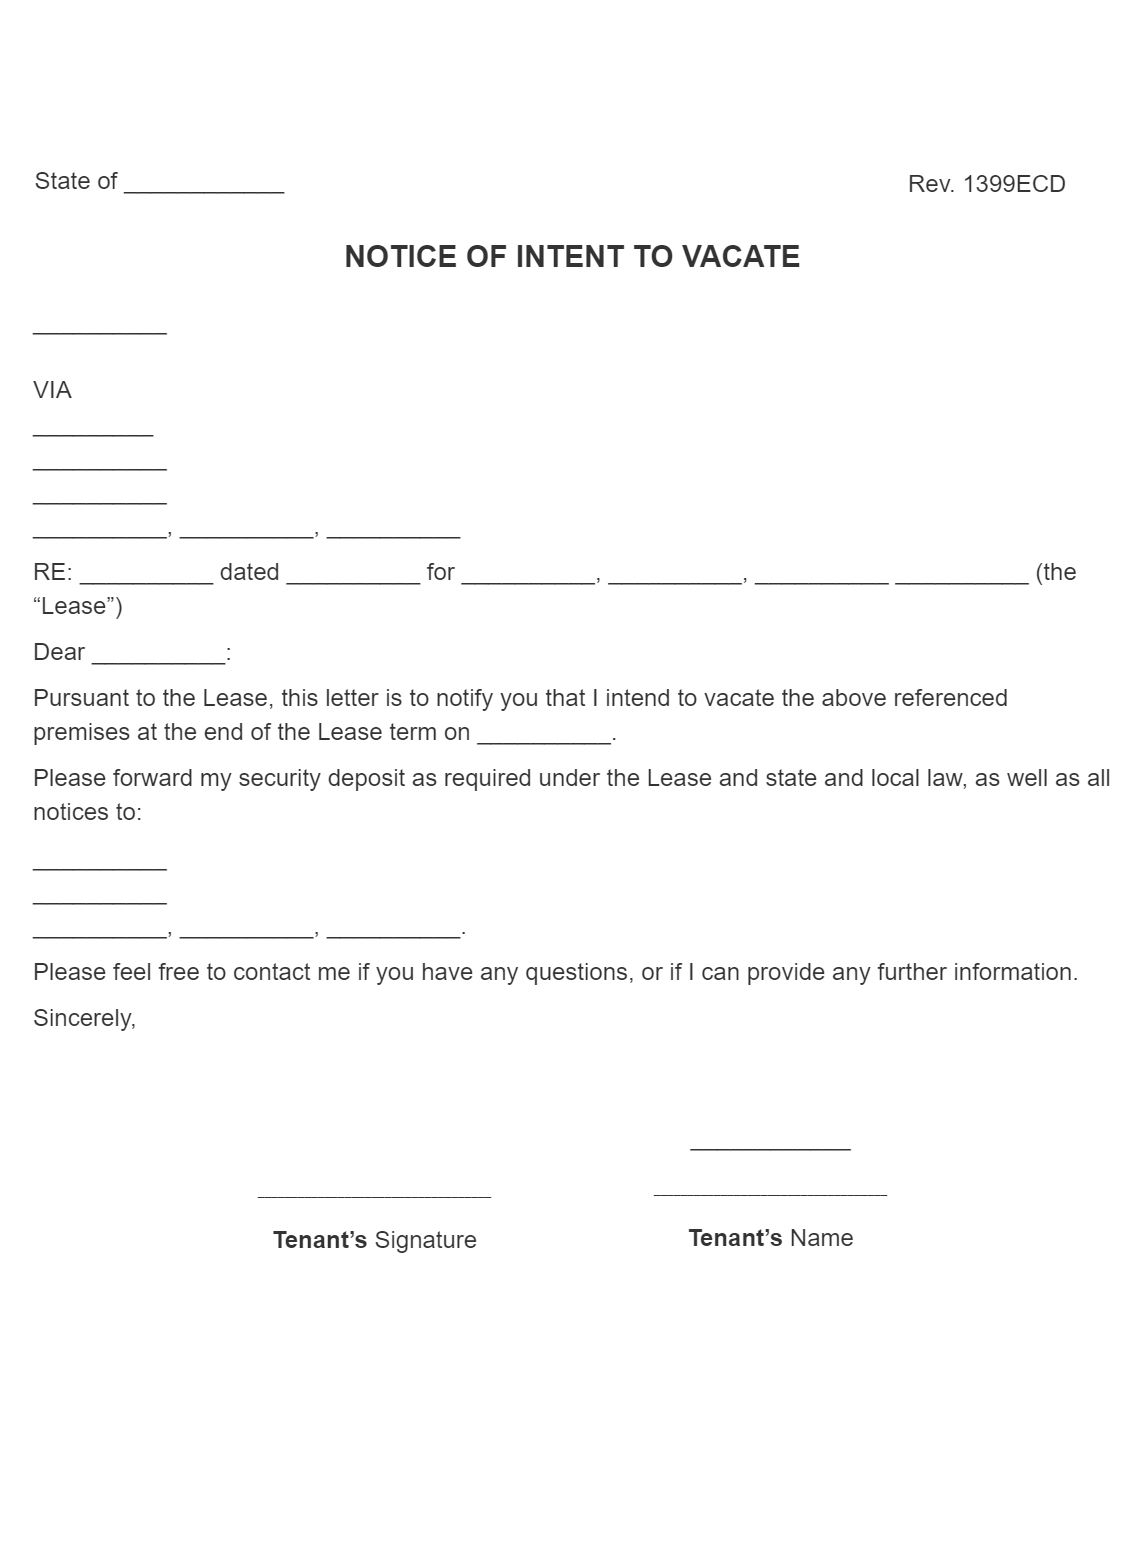 Notice of Intent to Vacate